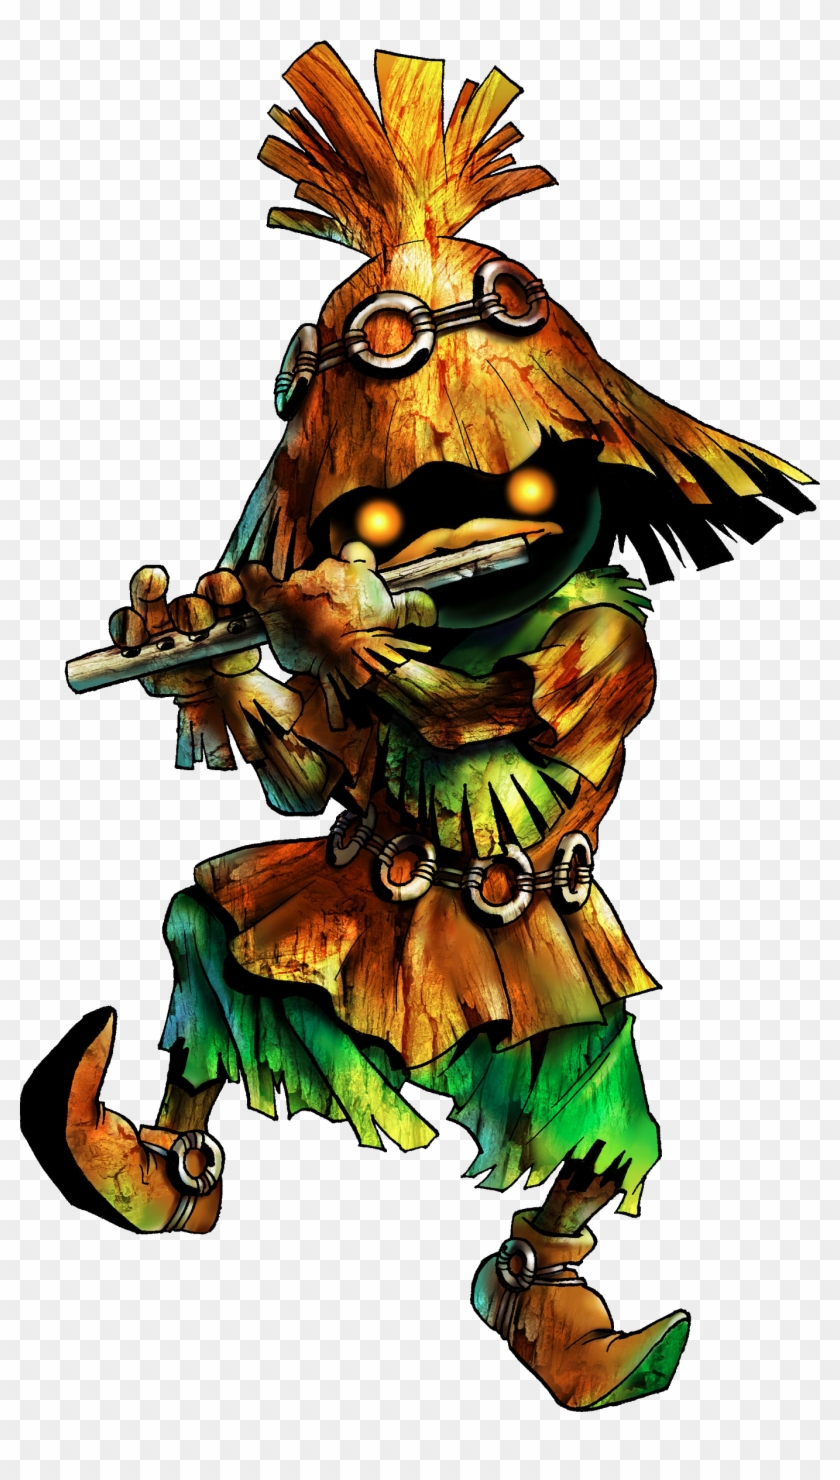 What Exactly Is Skull Kid Wearing I Know It's Some - Zelda Skull Kid Clipart #112738